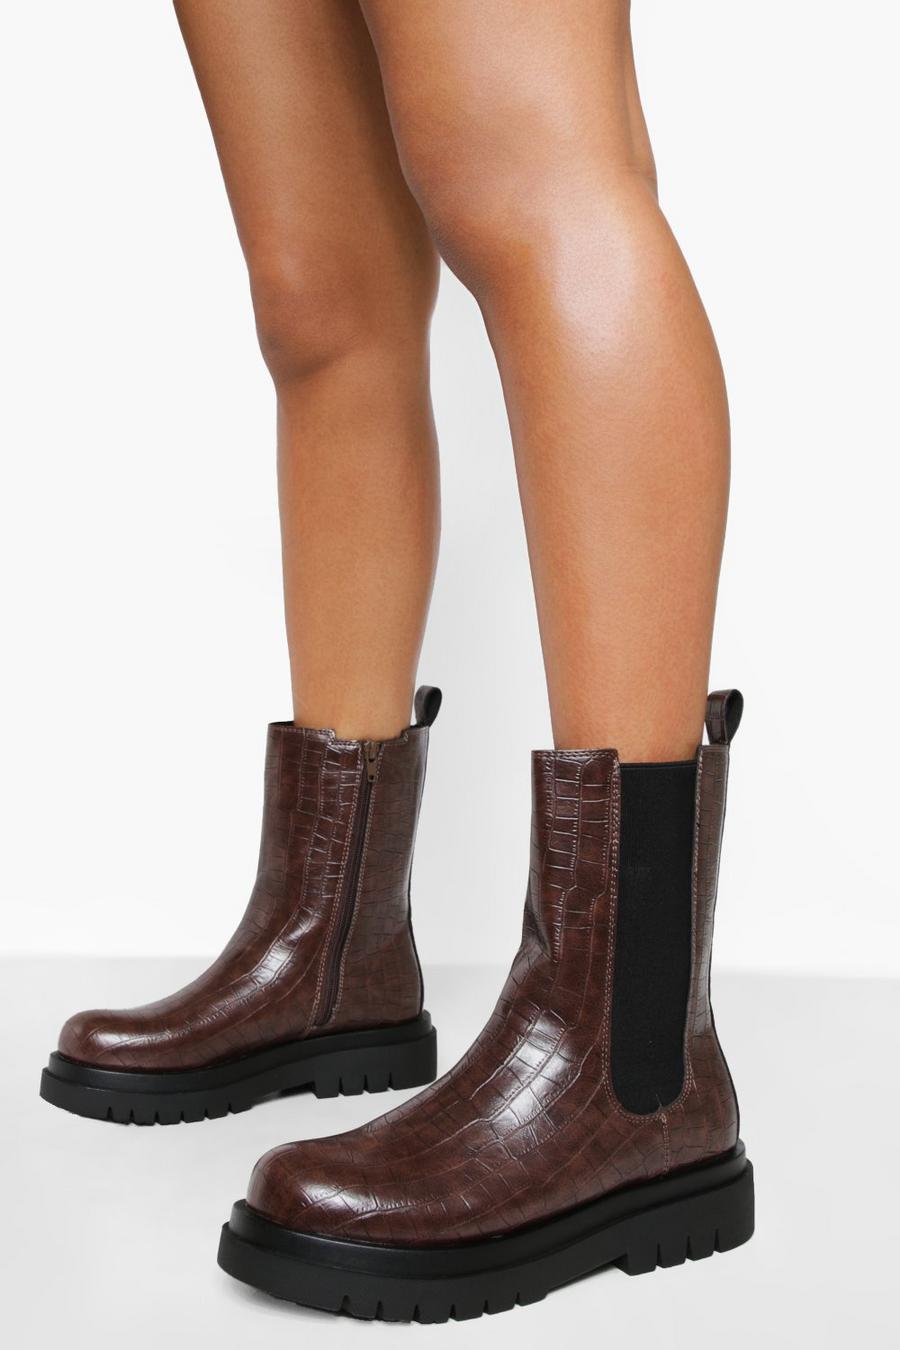 Chocolate brown Croc Chunky Chelsea Boots